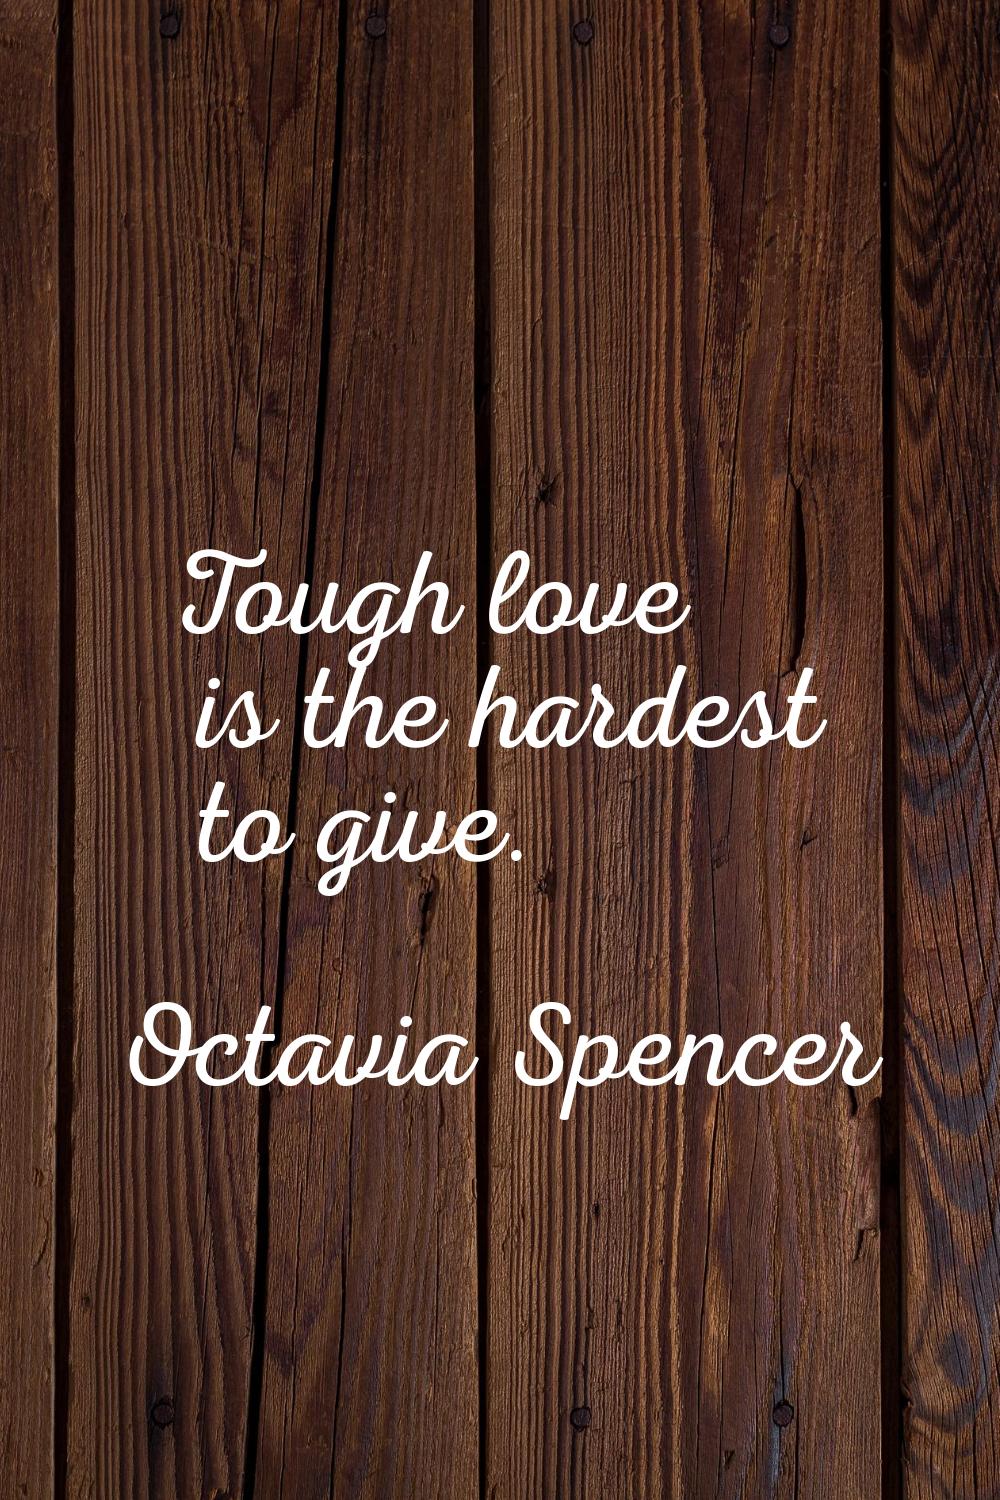 Tough love is the hardest to give.